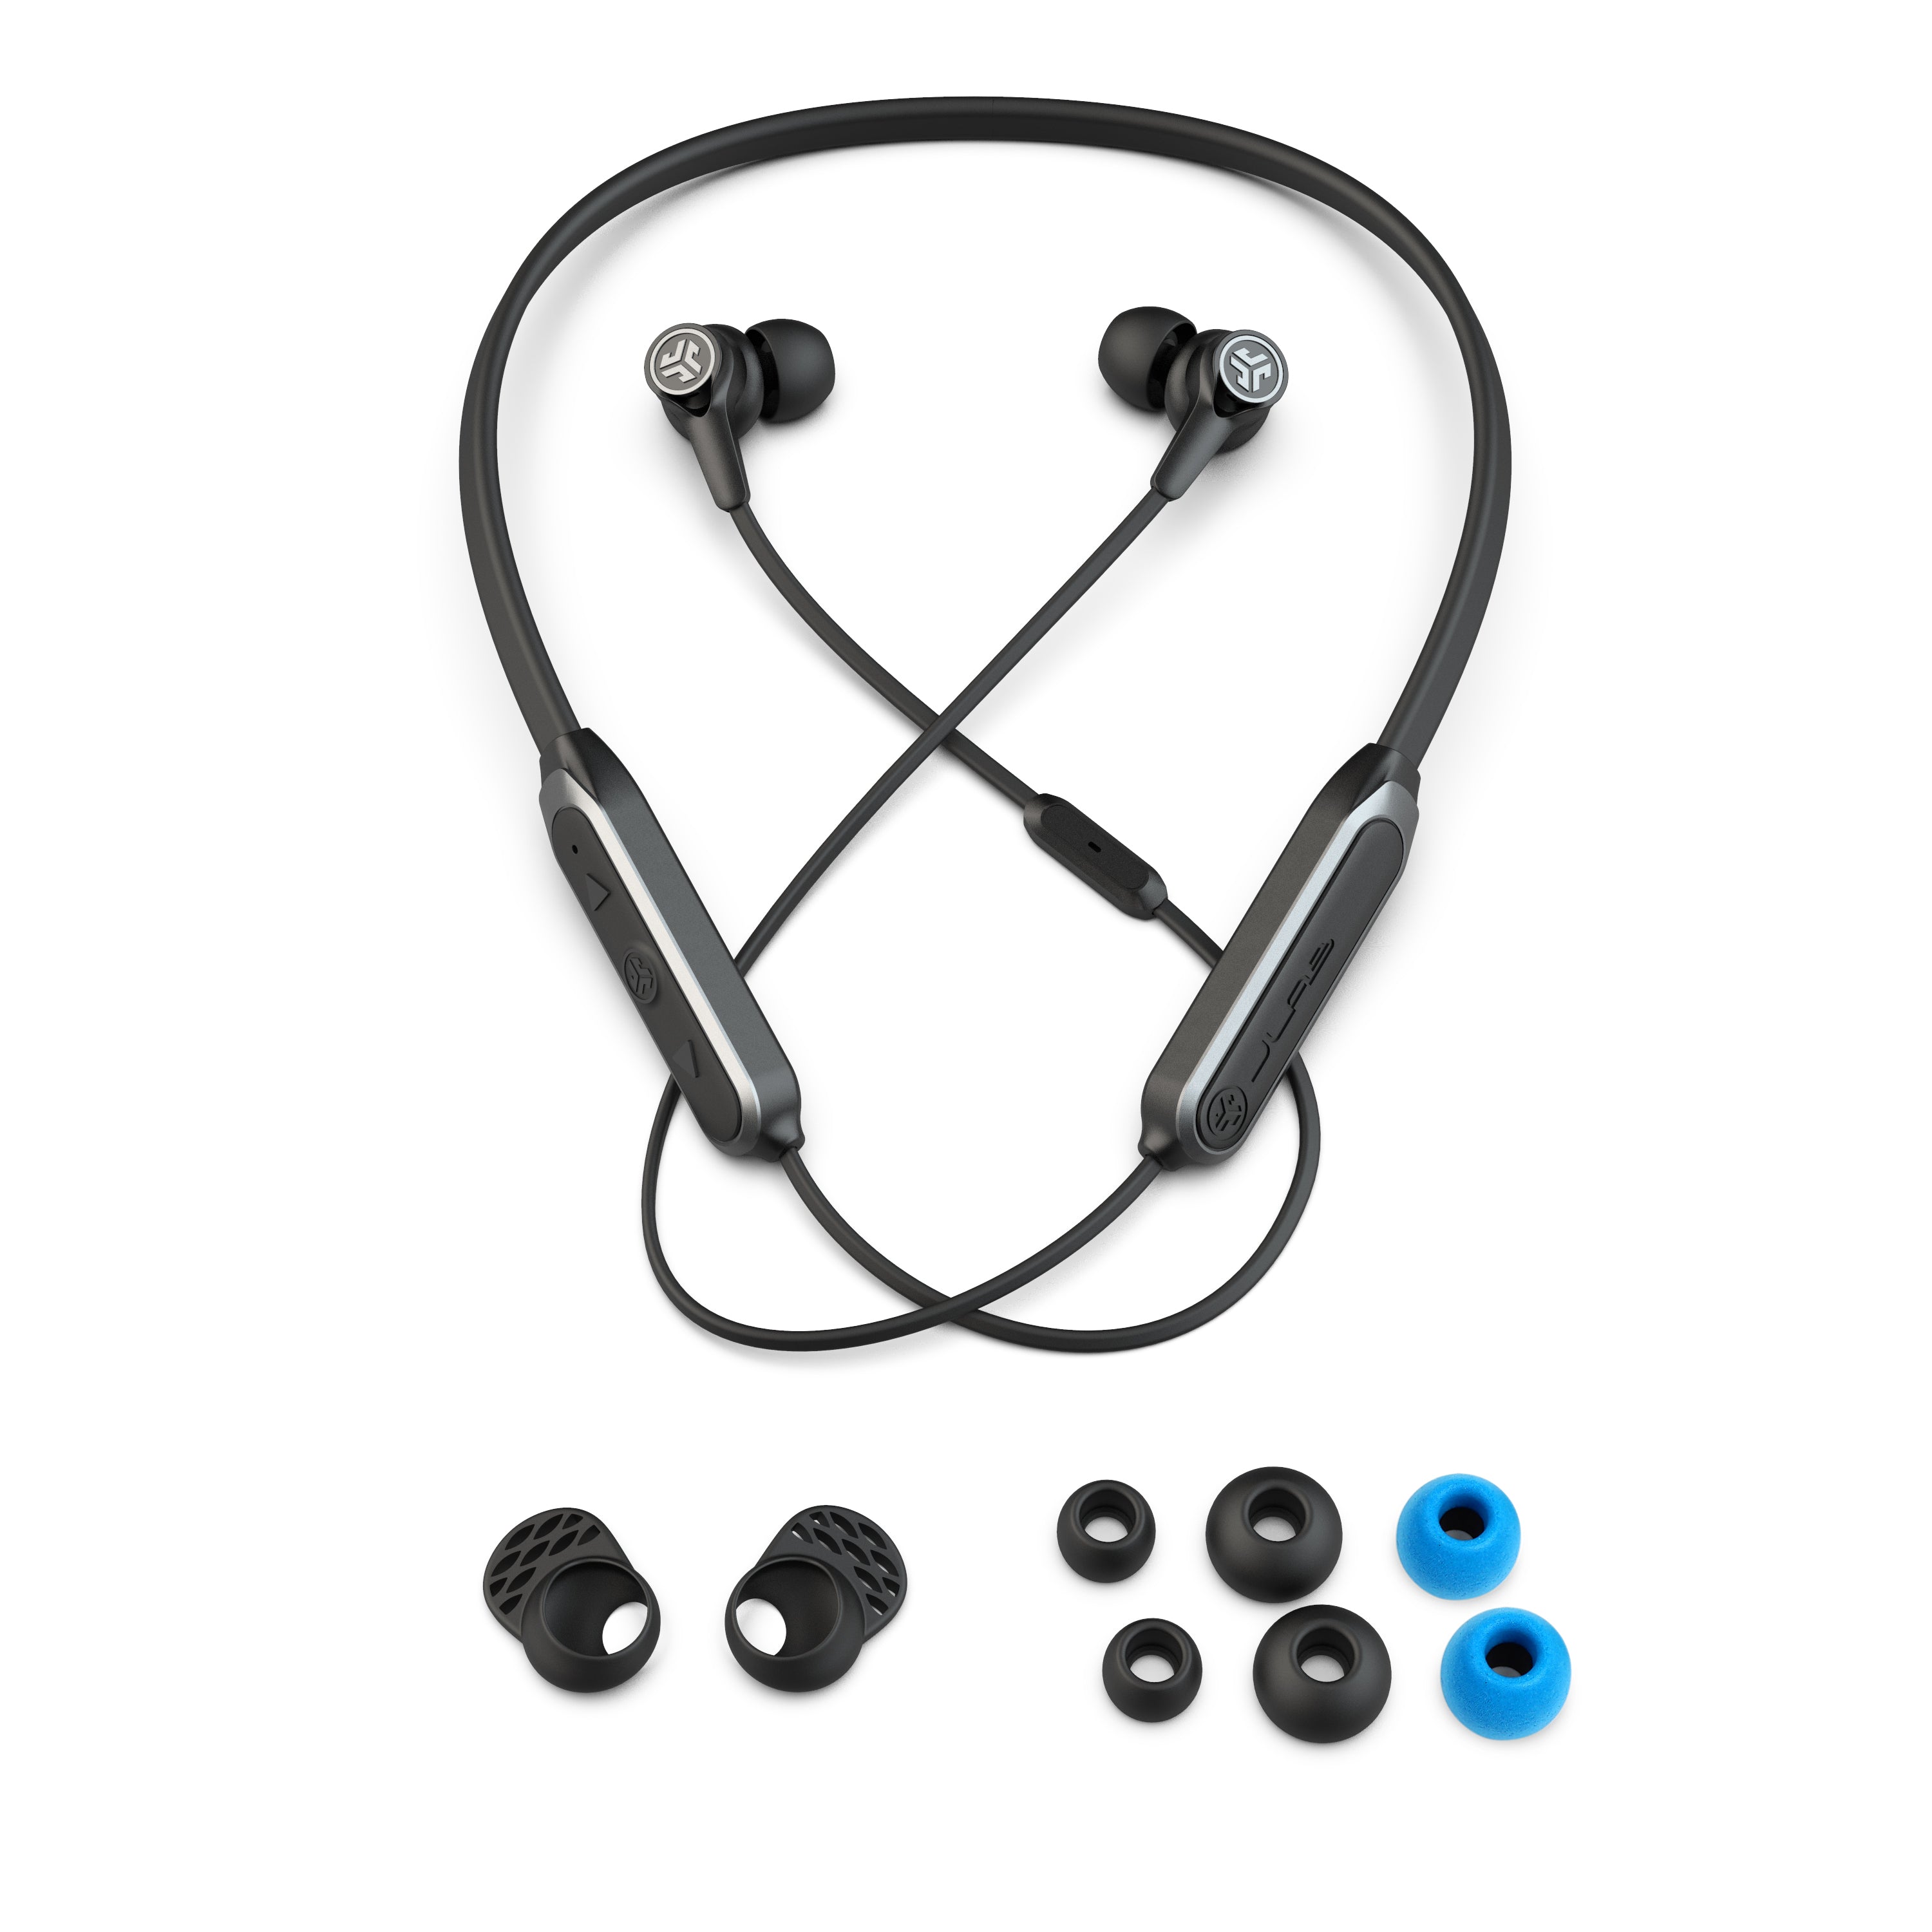 Black Epic Executive Wireless Earbud Accessories with Neckband, Cush Fins, Ear Tips, AUX Adaptor, and Traveling Case